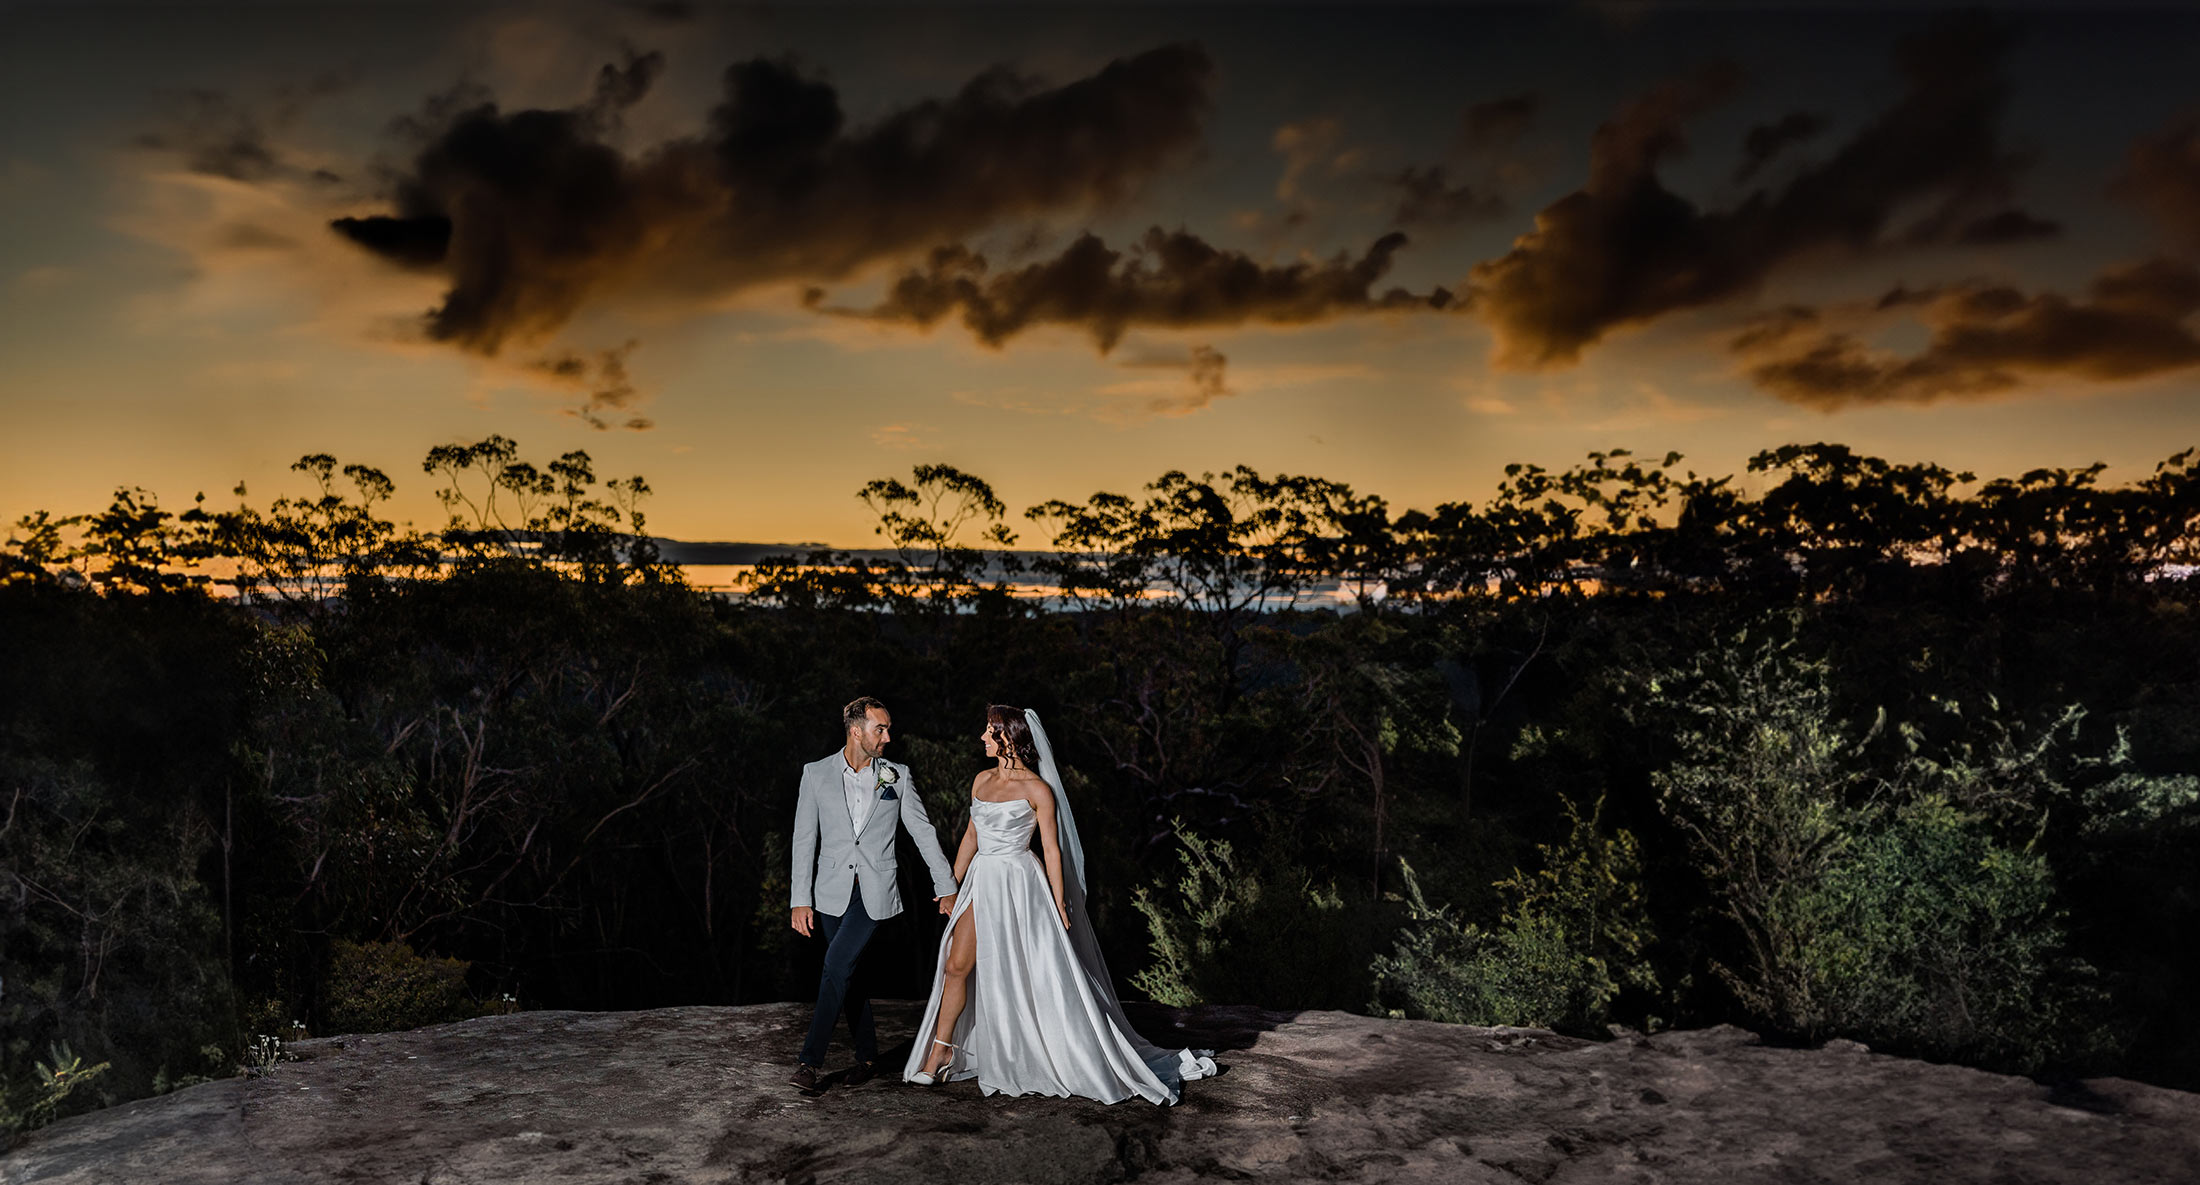 wedding photography at sunset time